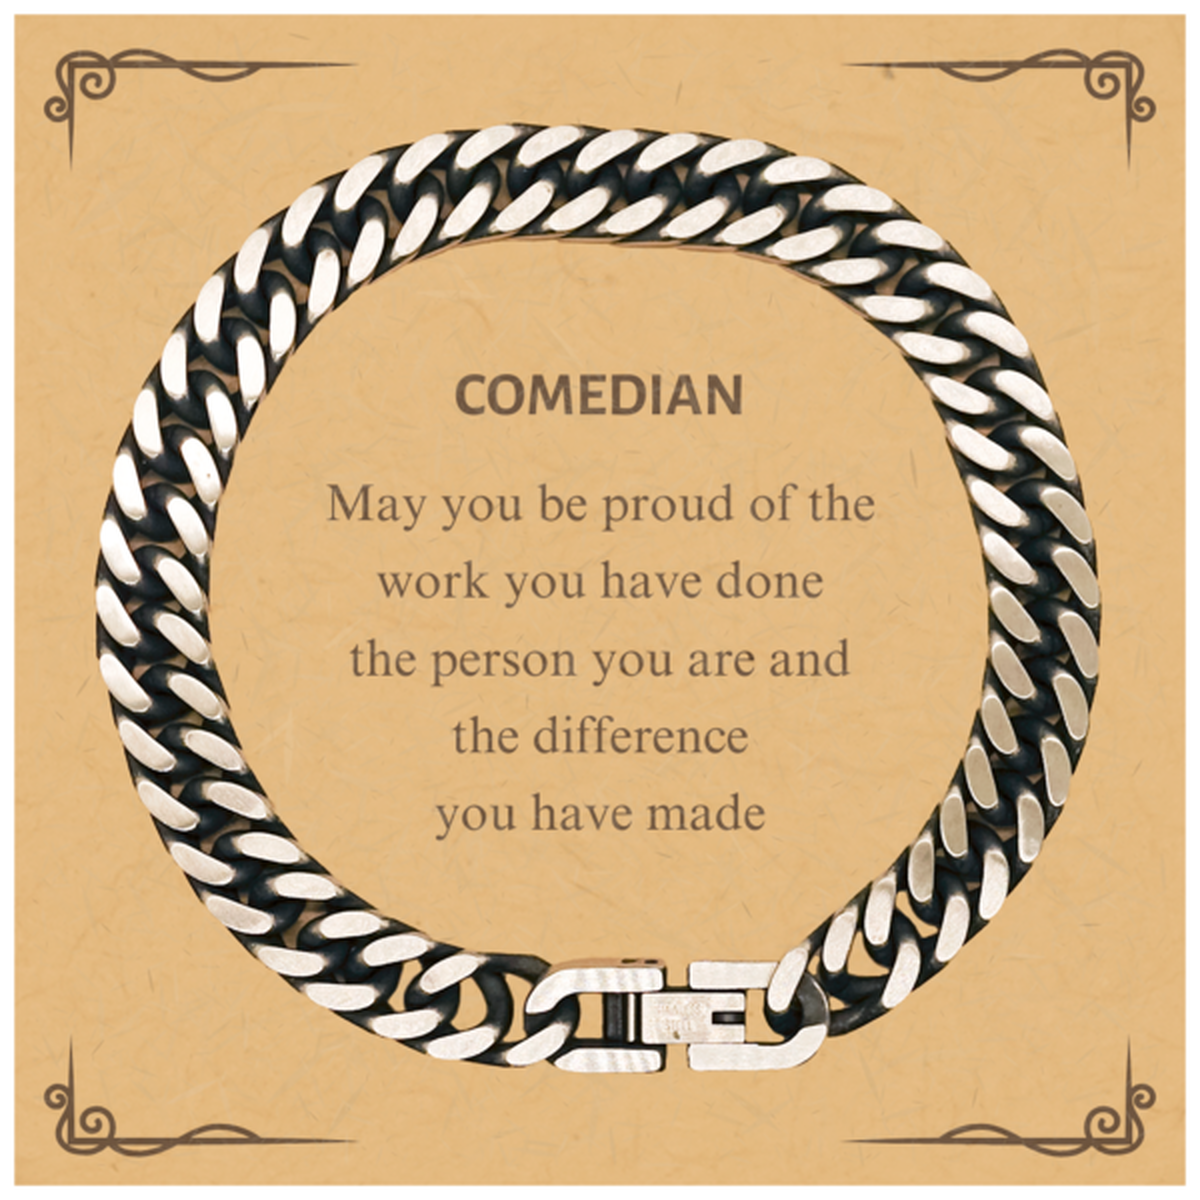 Comedian May you be proud of the work you have done, Retirement Comedian Cuban Link Chain Bracelet for Colleague Appreciation Gifts Amazing for Comedian